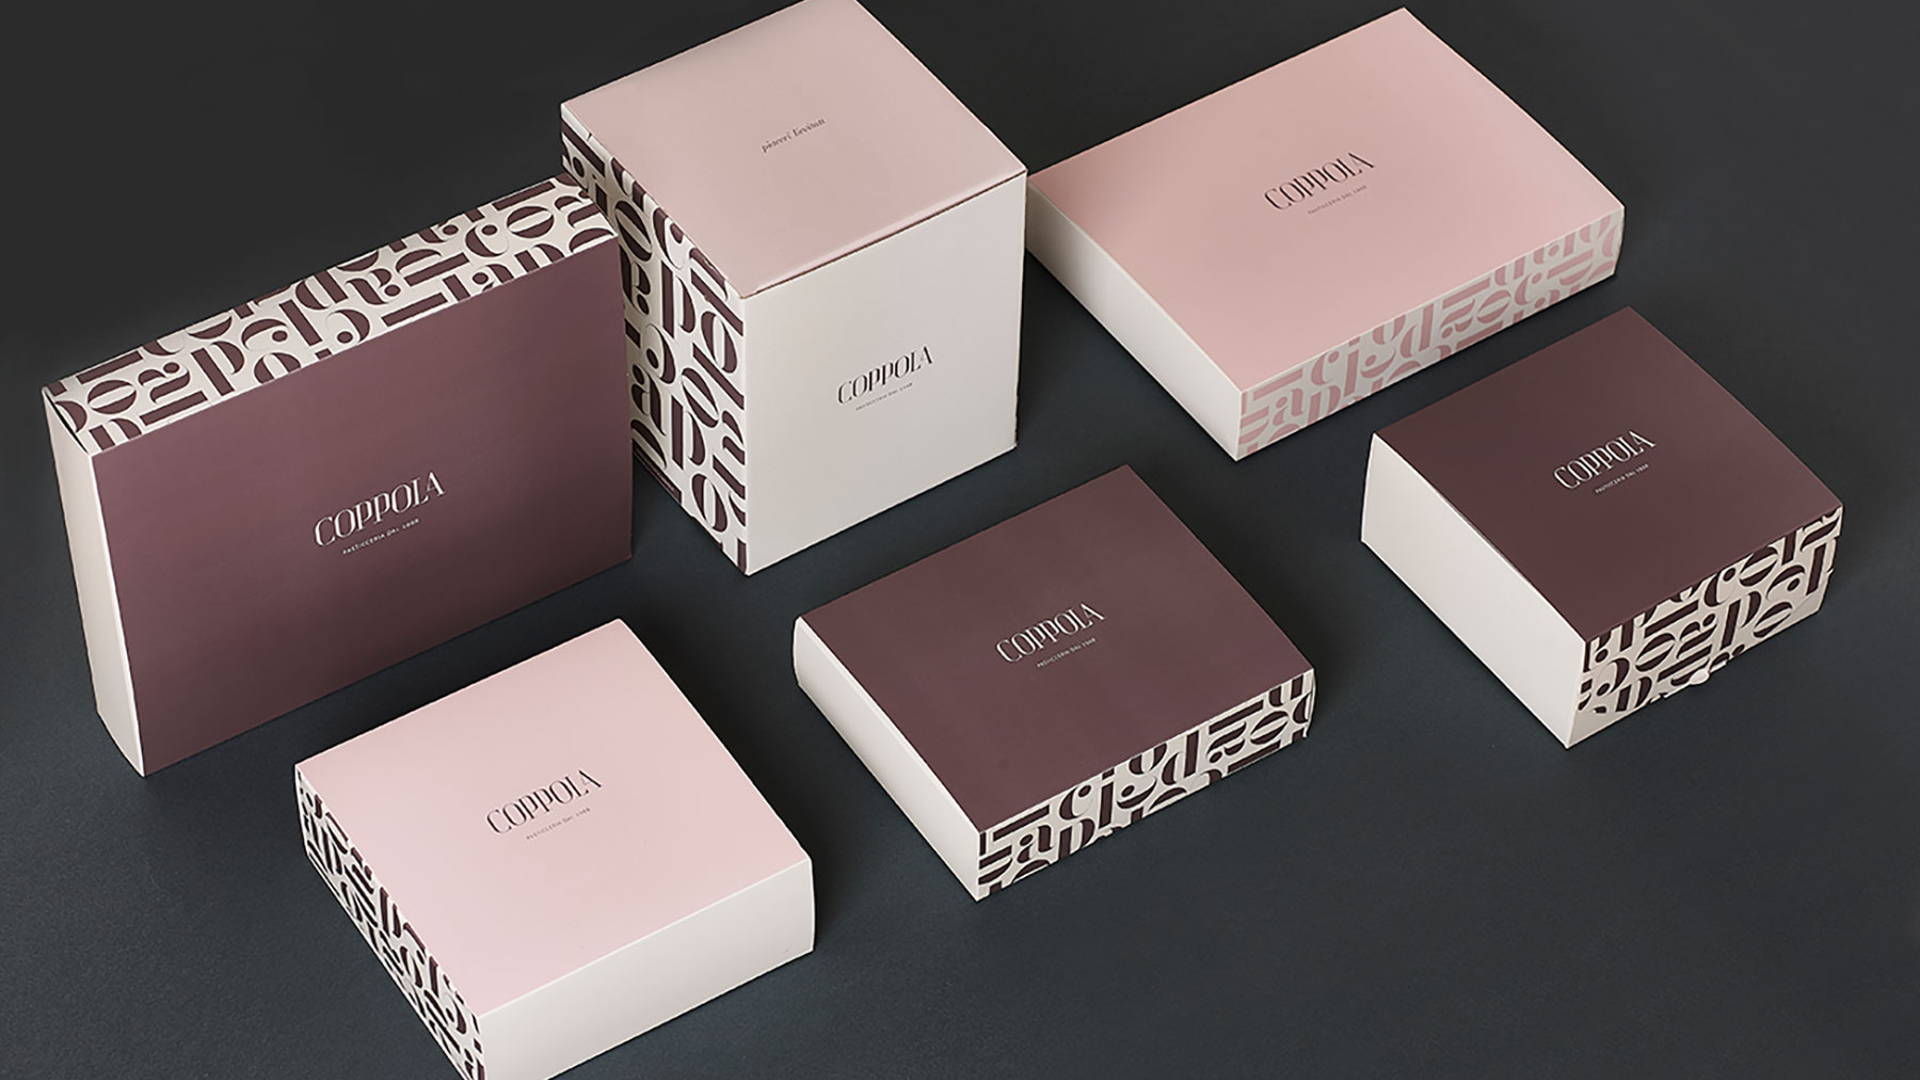 Featured image for This Italian Bakery's Packaging Comes With a Beautiful Typographic Pattern